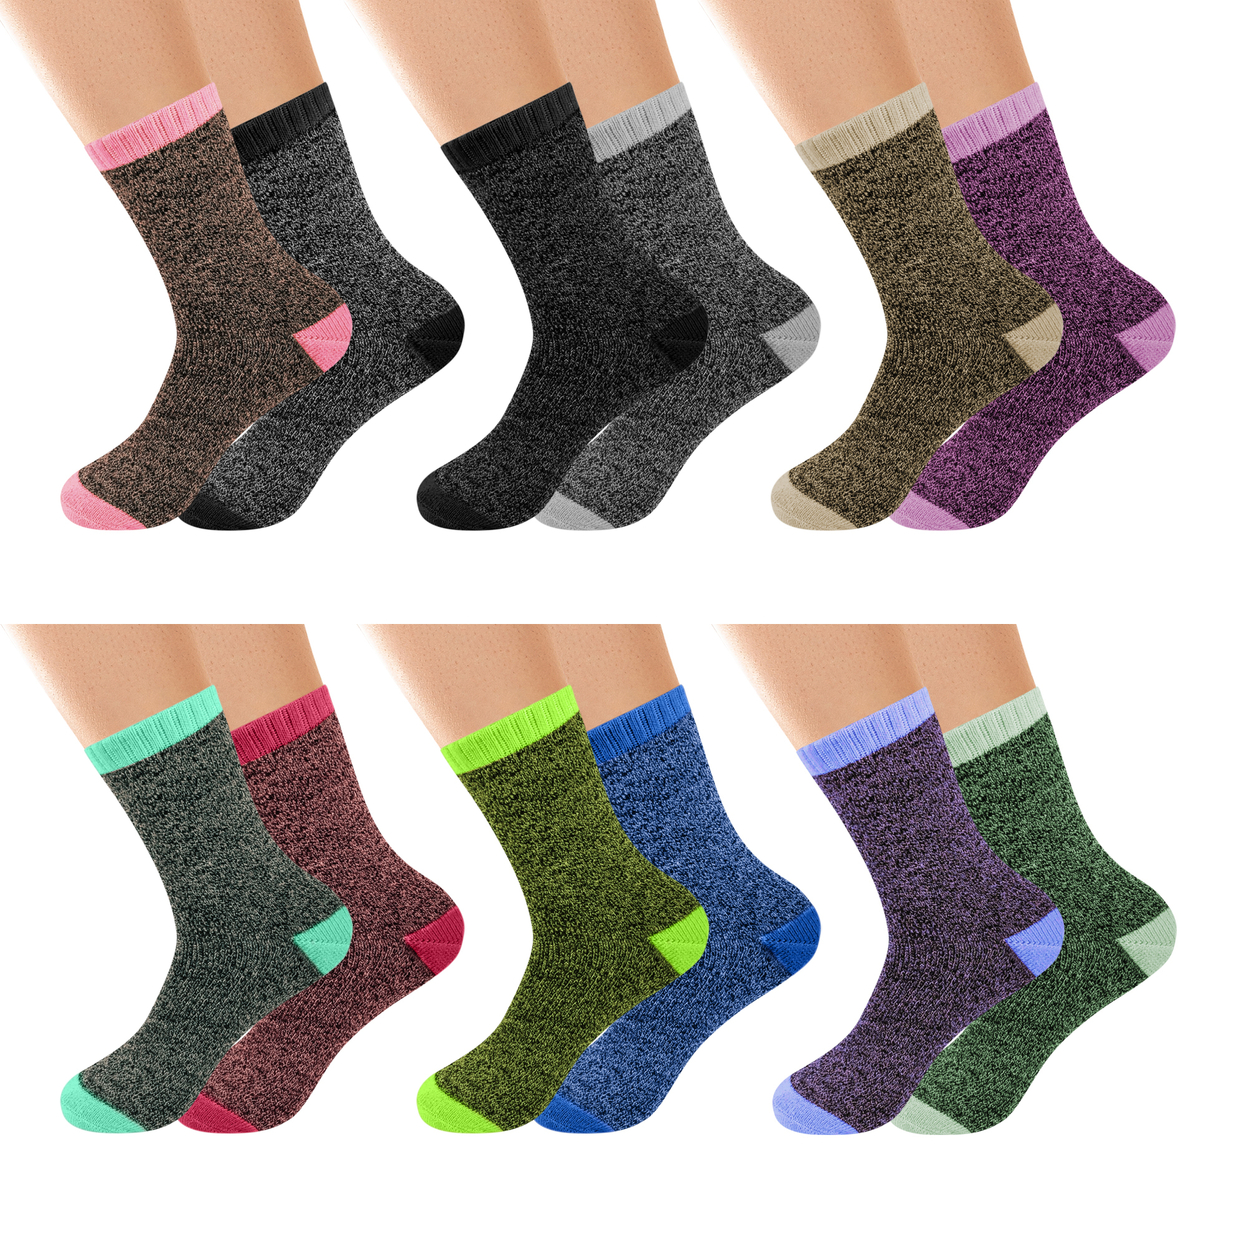 Multi-Pairs: Women's Winter Warm Thick Soft Cozy Thermal Boot Socks - 12-pack